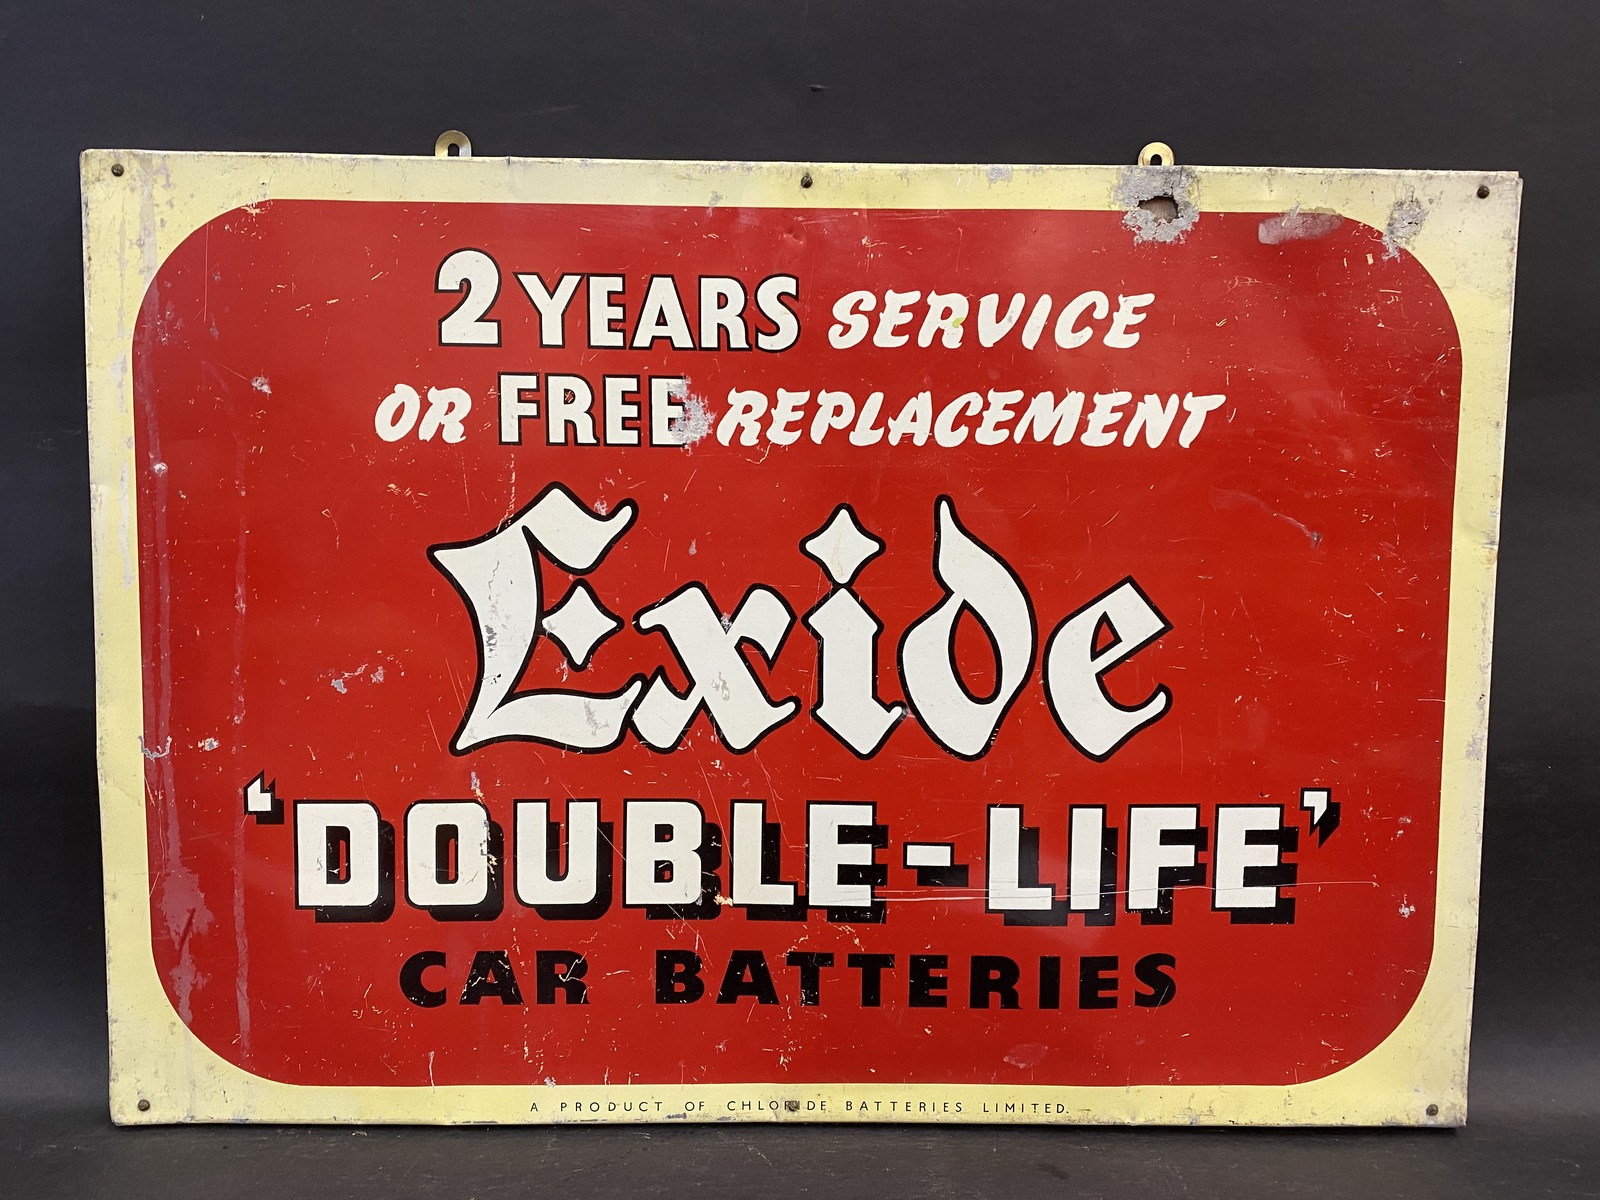 An Exide 'Double-Life' Car Batteries aluminium sign, mounted on board, 24 1/2 x 17".